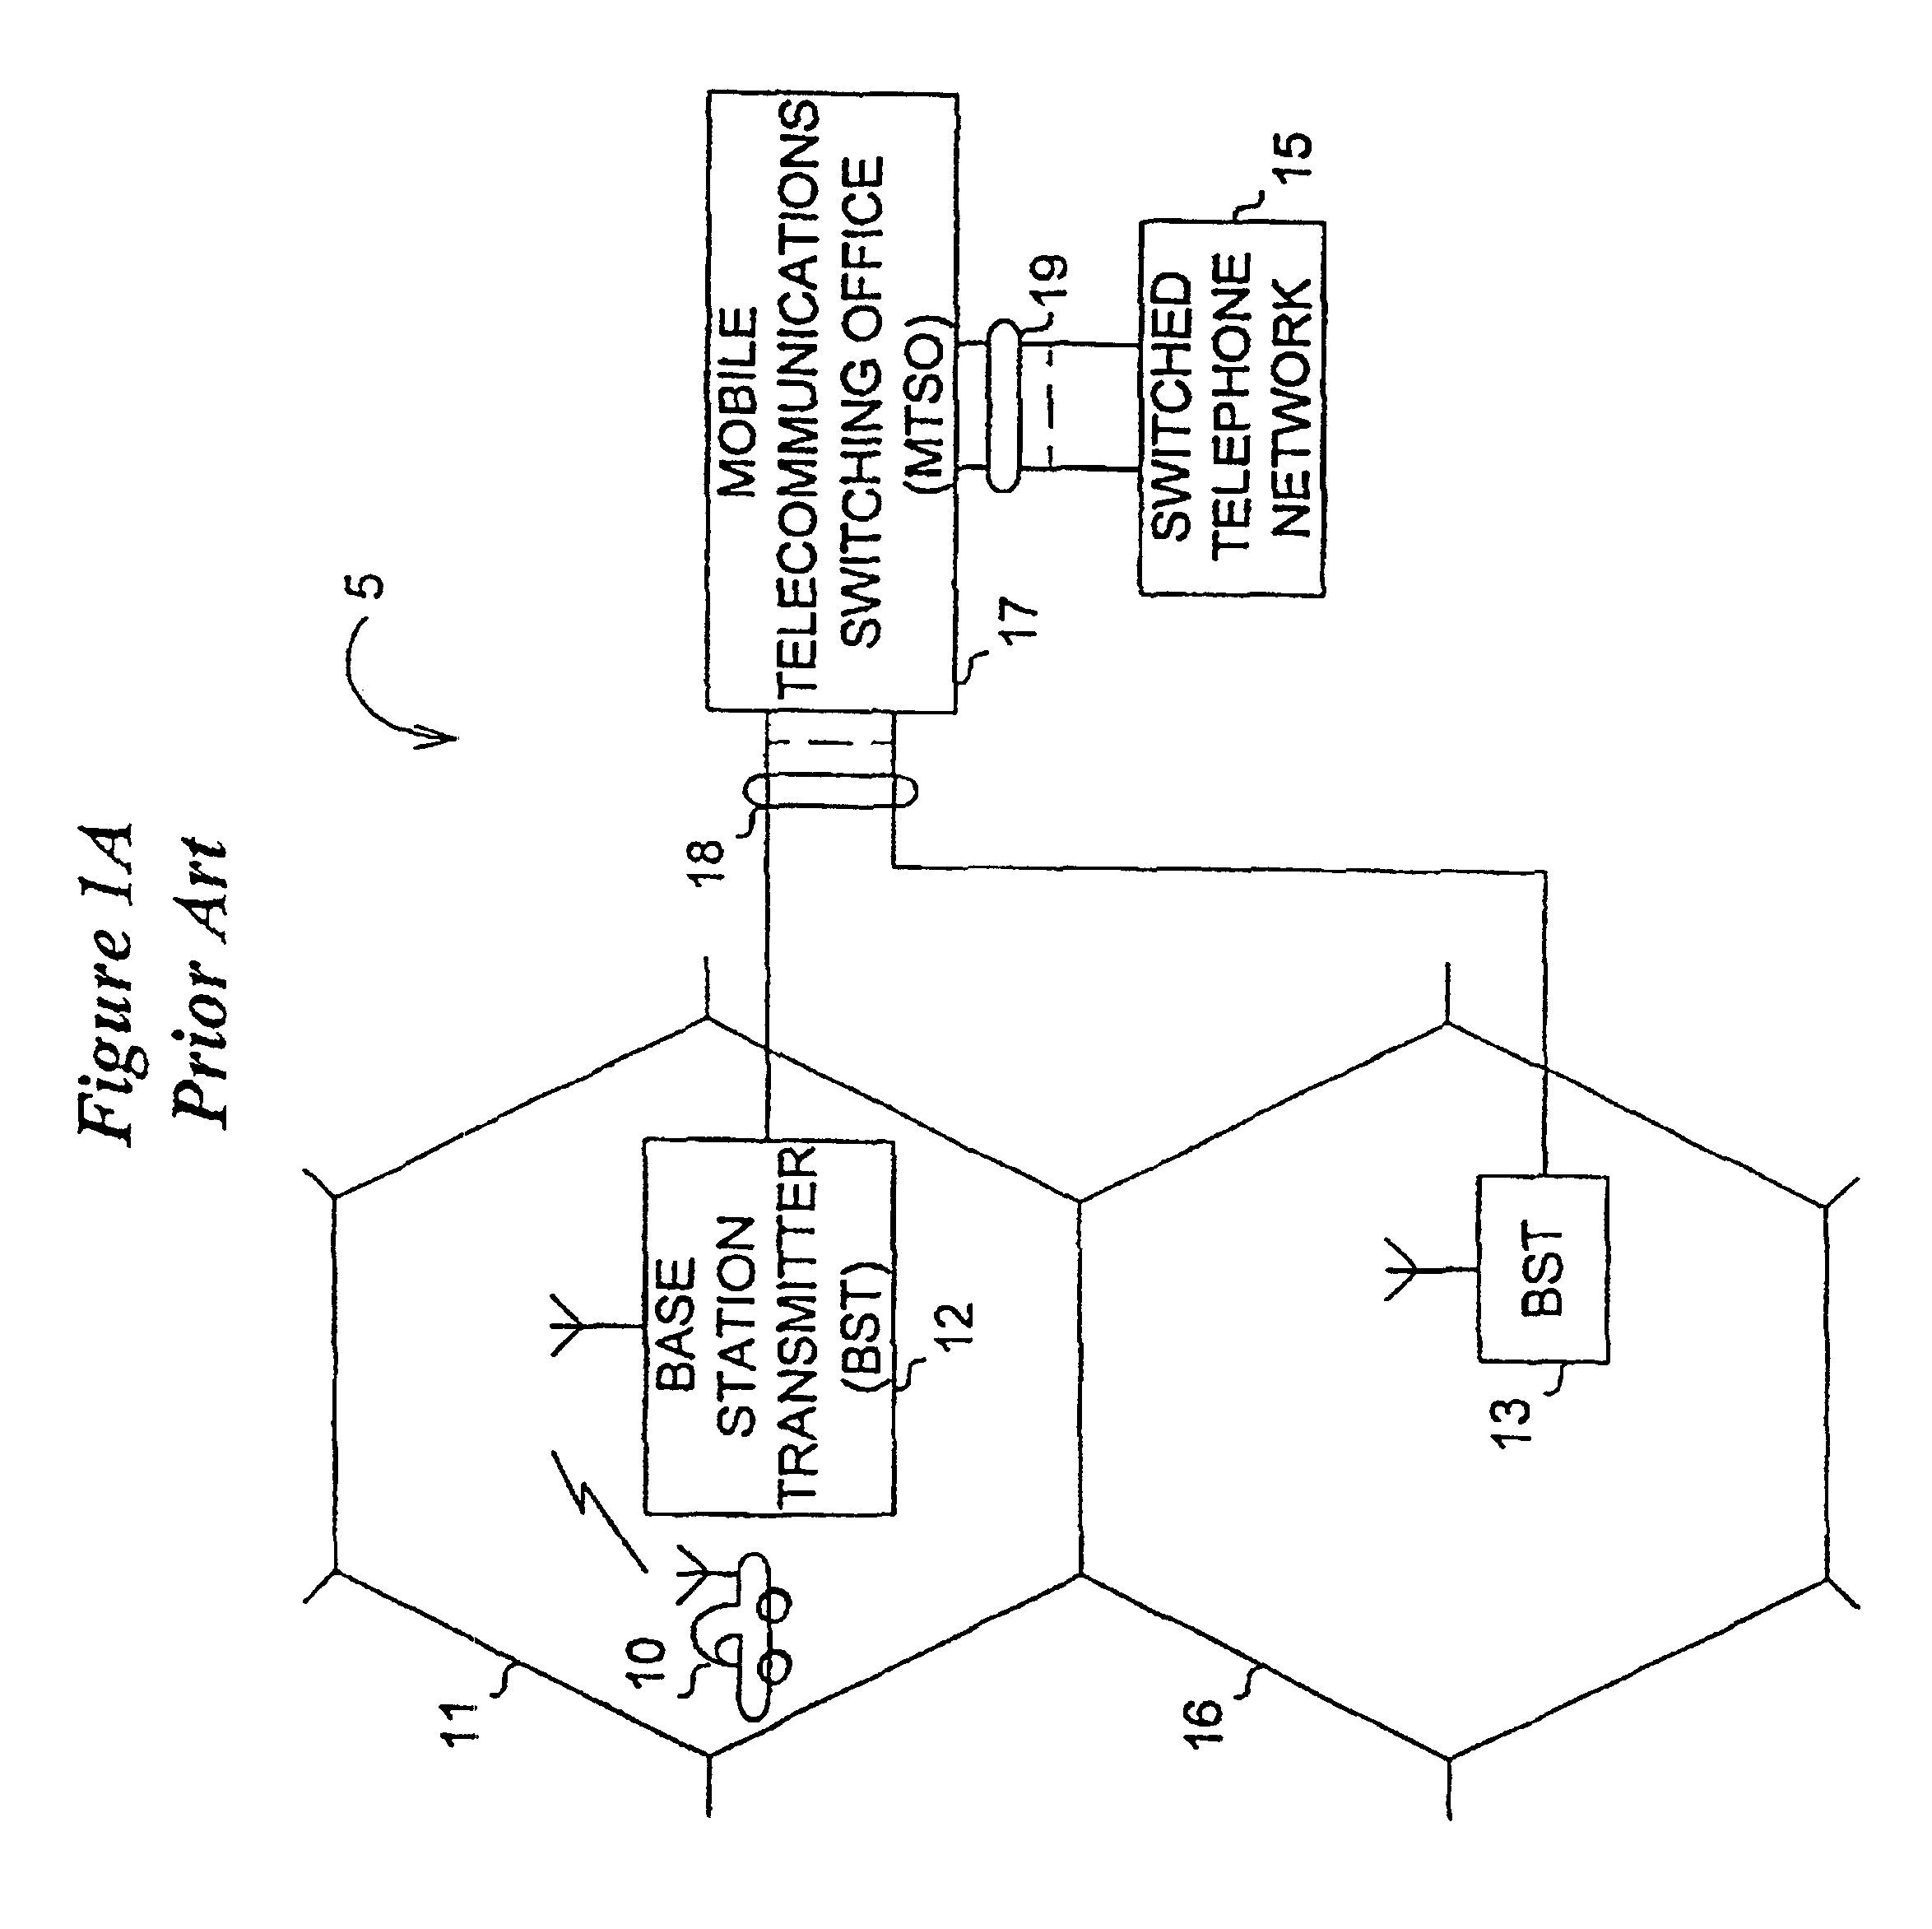 Cellular communications system with sectorization